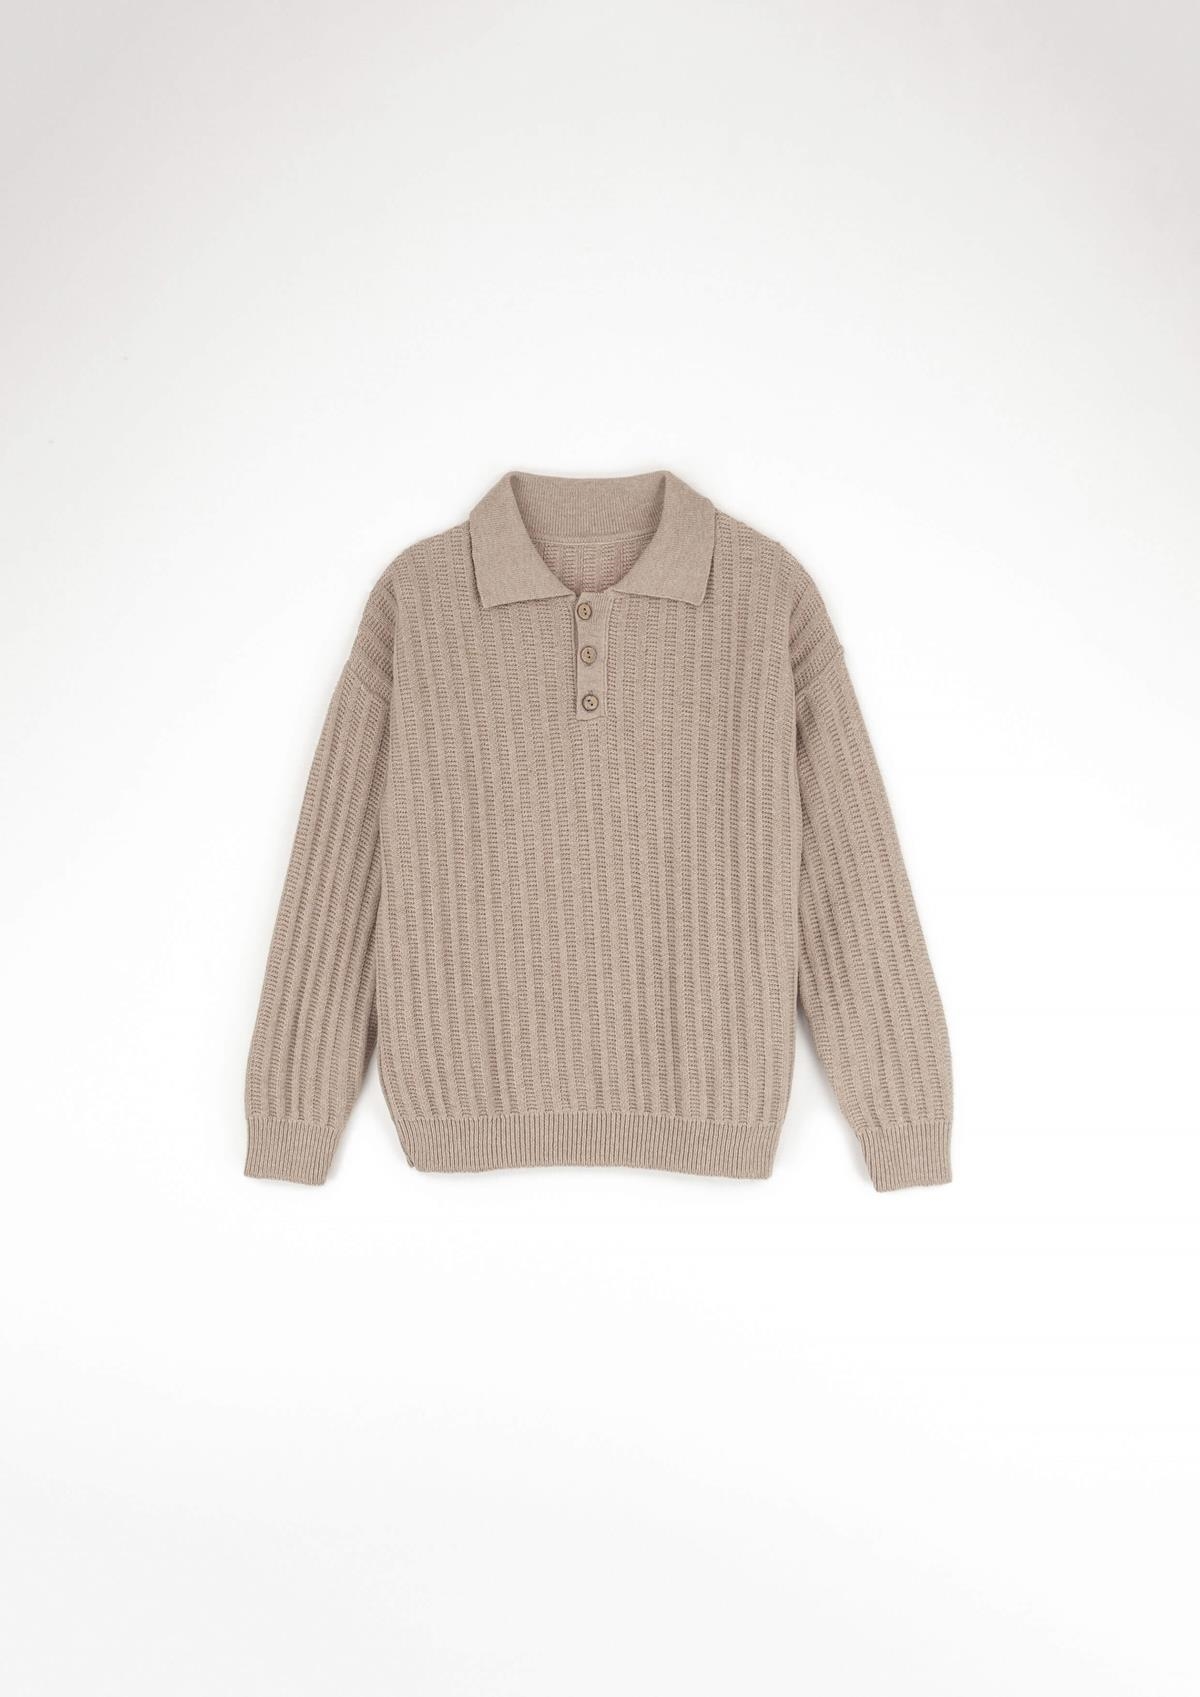 Mod.20.2 Beige knitted jersey with shirt-style collar | AW23.24 Mod.20.2 Beige knitted jersey with shirt-style collar